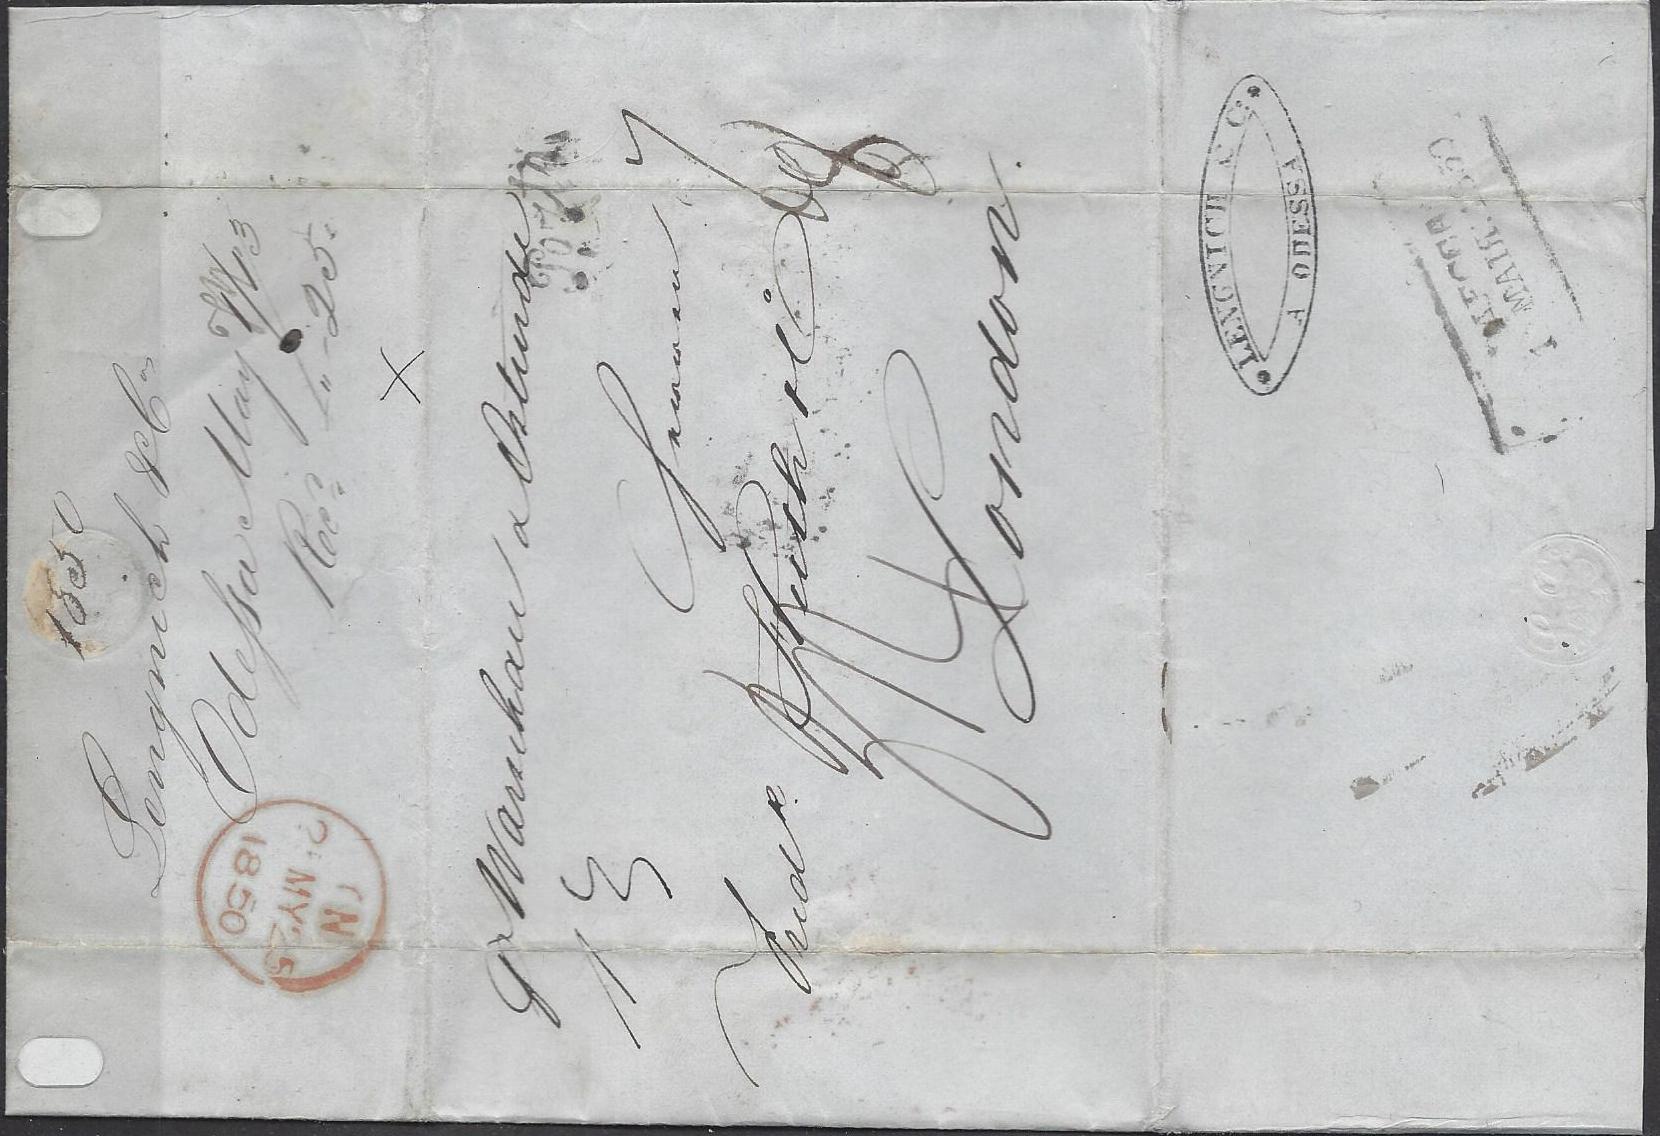 Russia Postal History - Stampless Covers Odessa Scott 2501850 